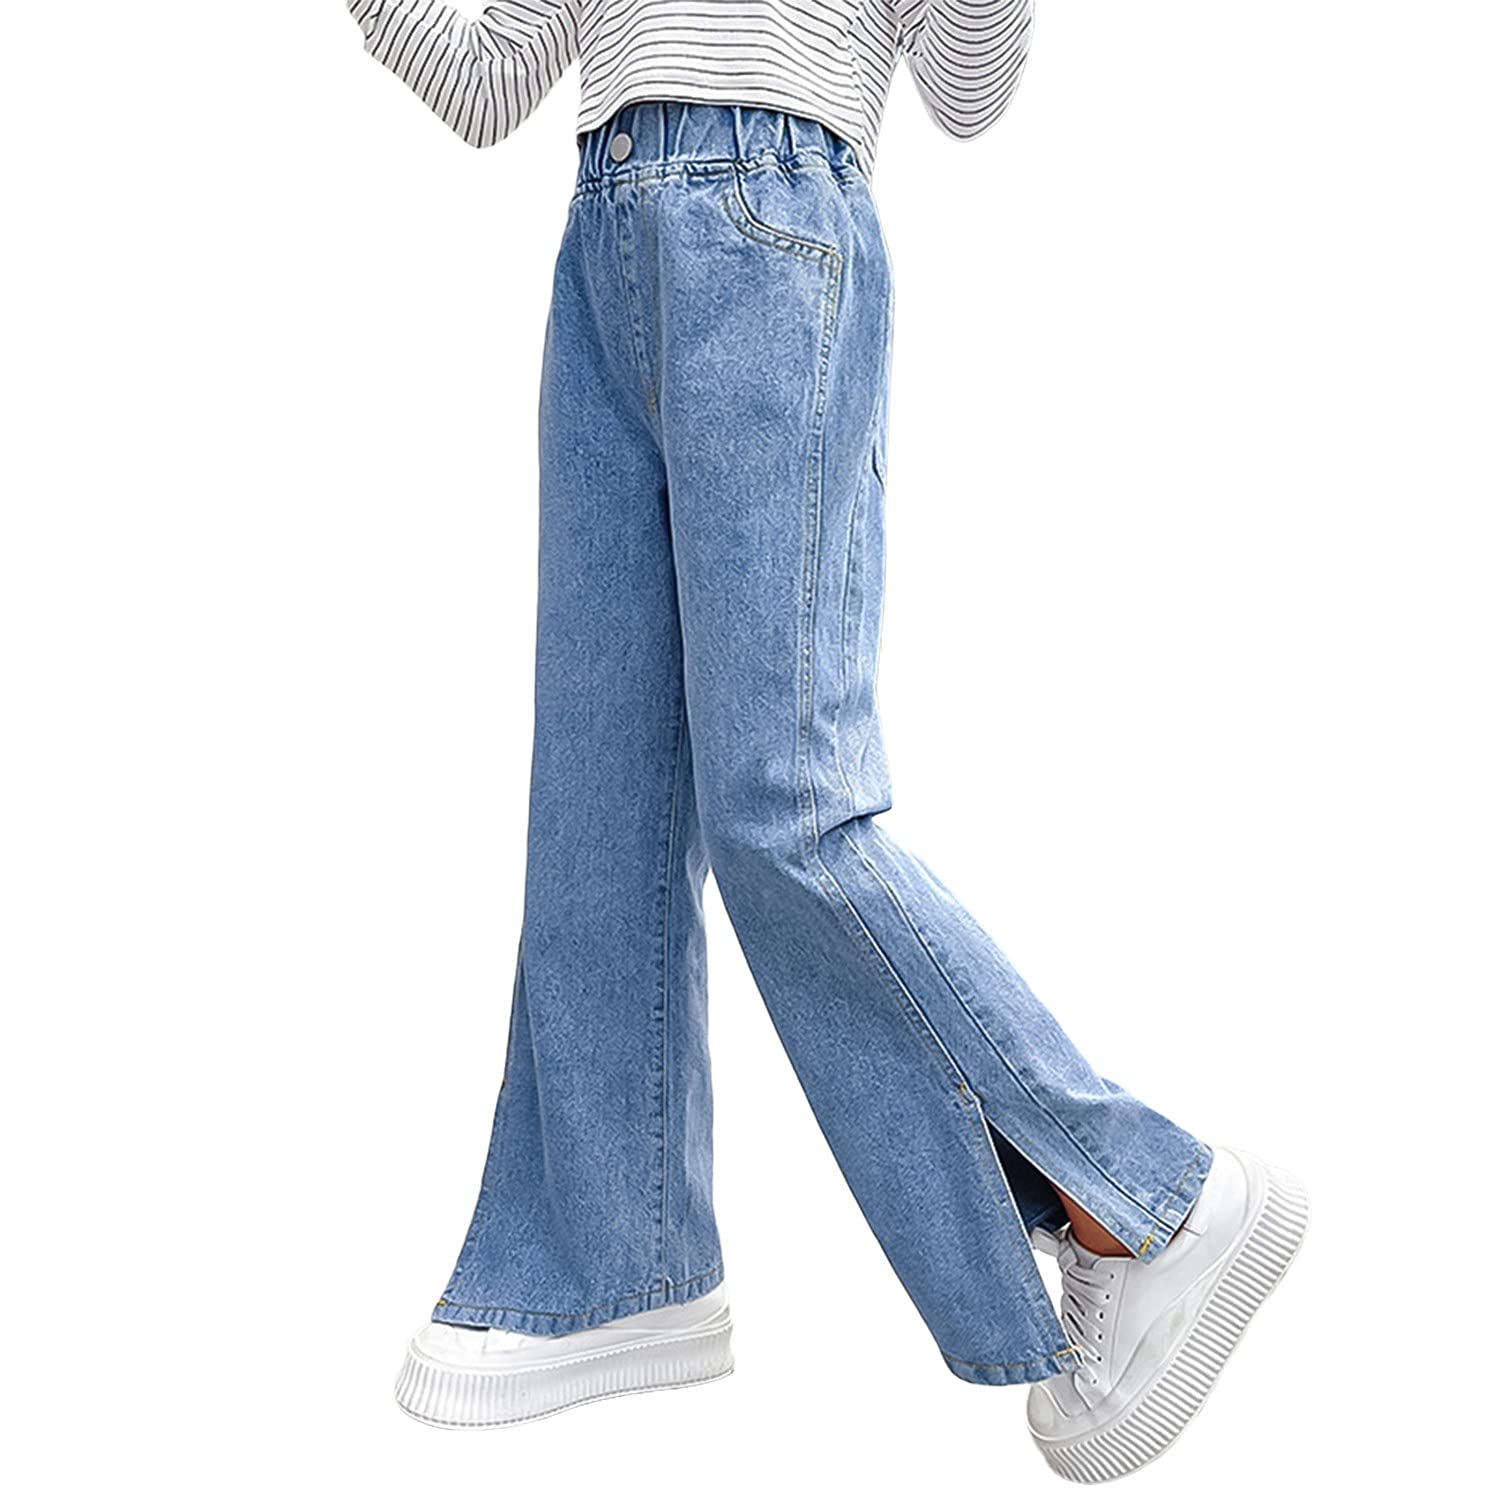 Spring Autumn Girls Jeans Children Kids Little Girl Denim Pants Trousers  Cute Embroidery Bootcut Jeans | Wish